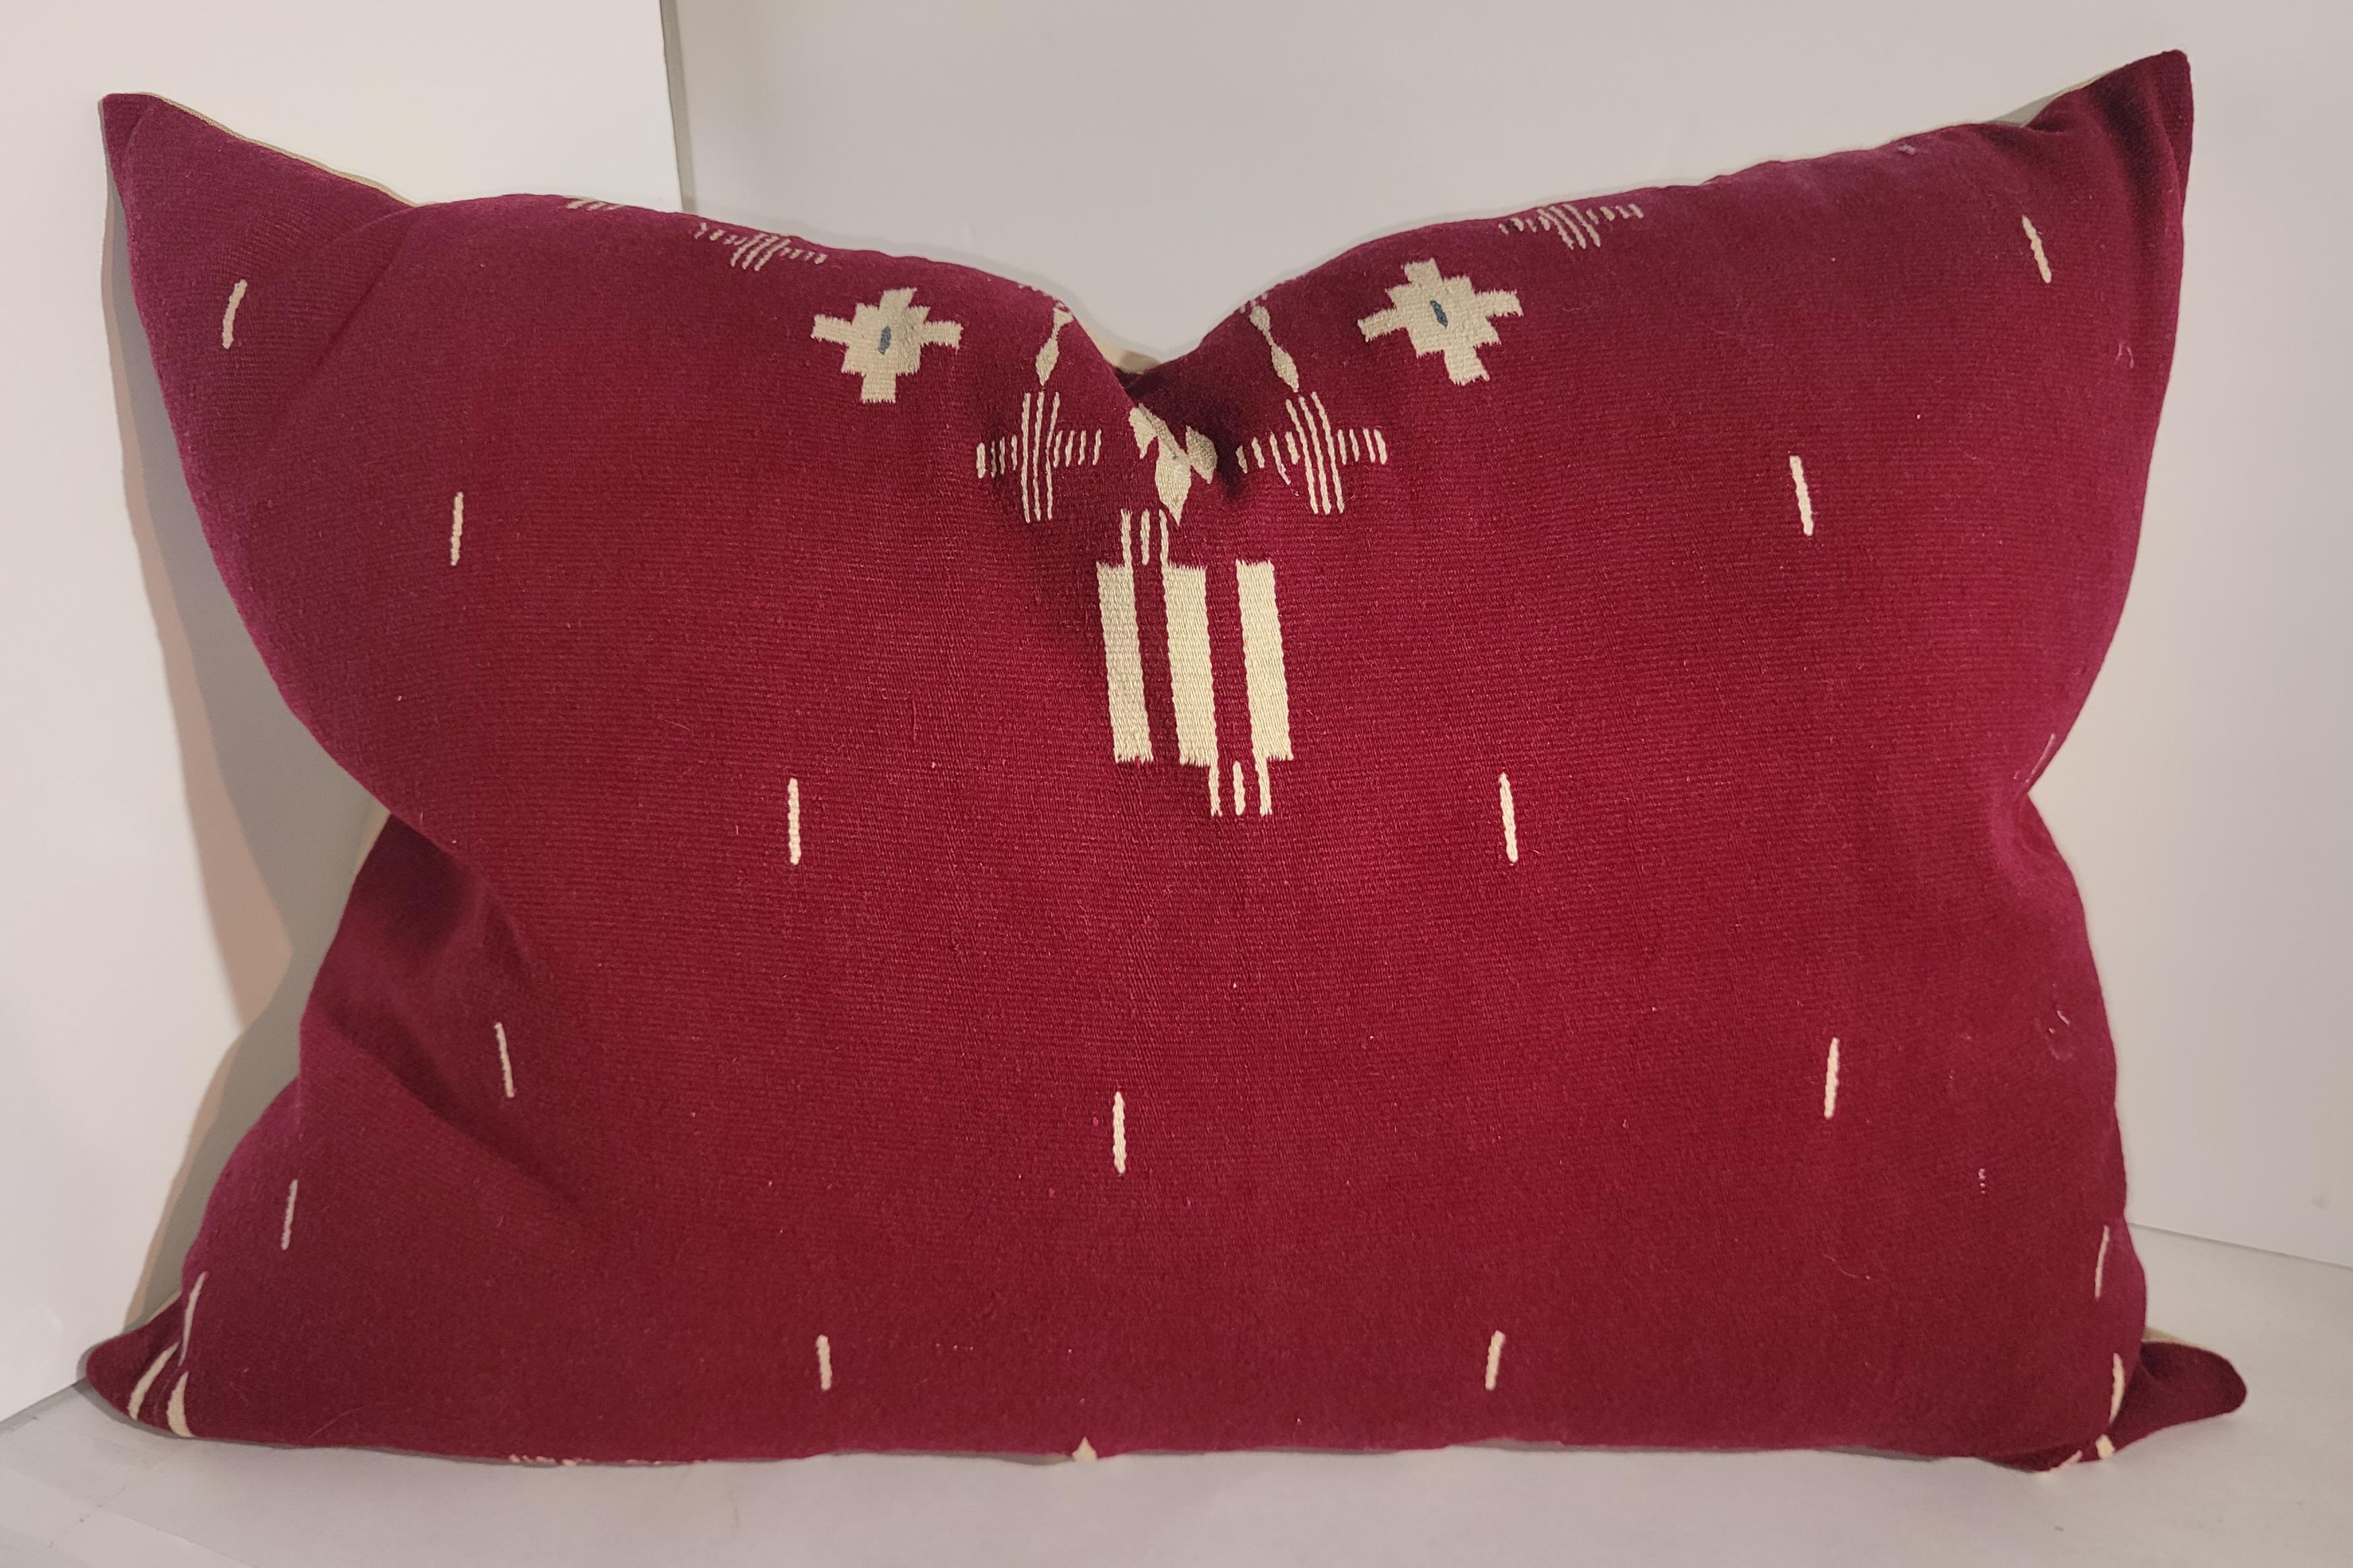 Wonderful wool texcoco pillows in a magenta color with thick vintage linen backing. Texcoco fabriic made into pillows.